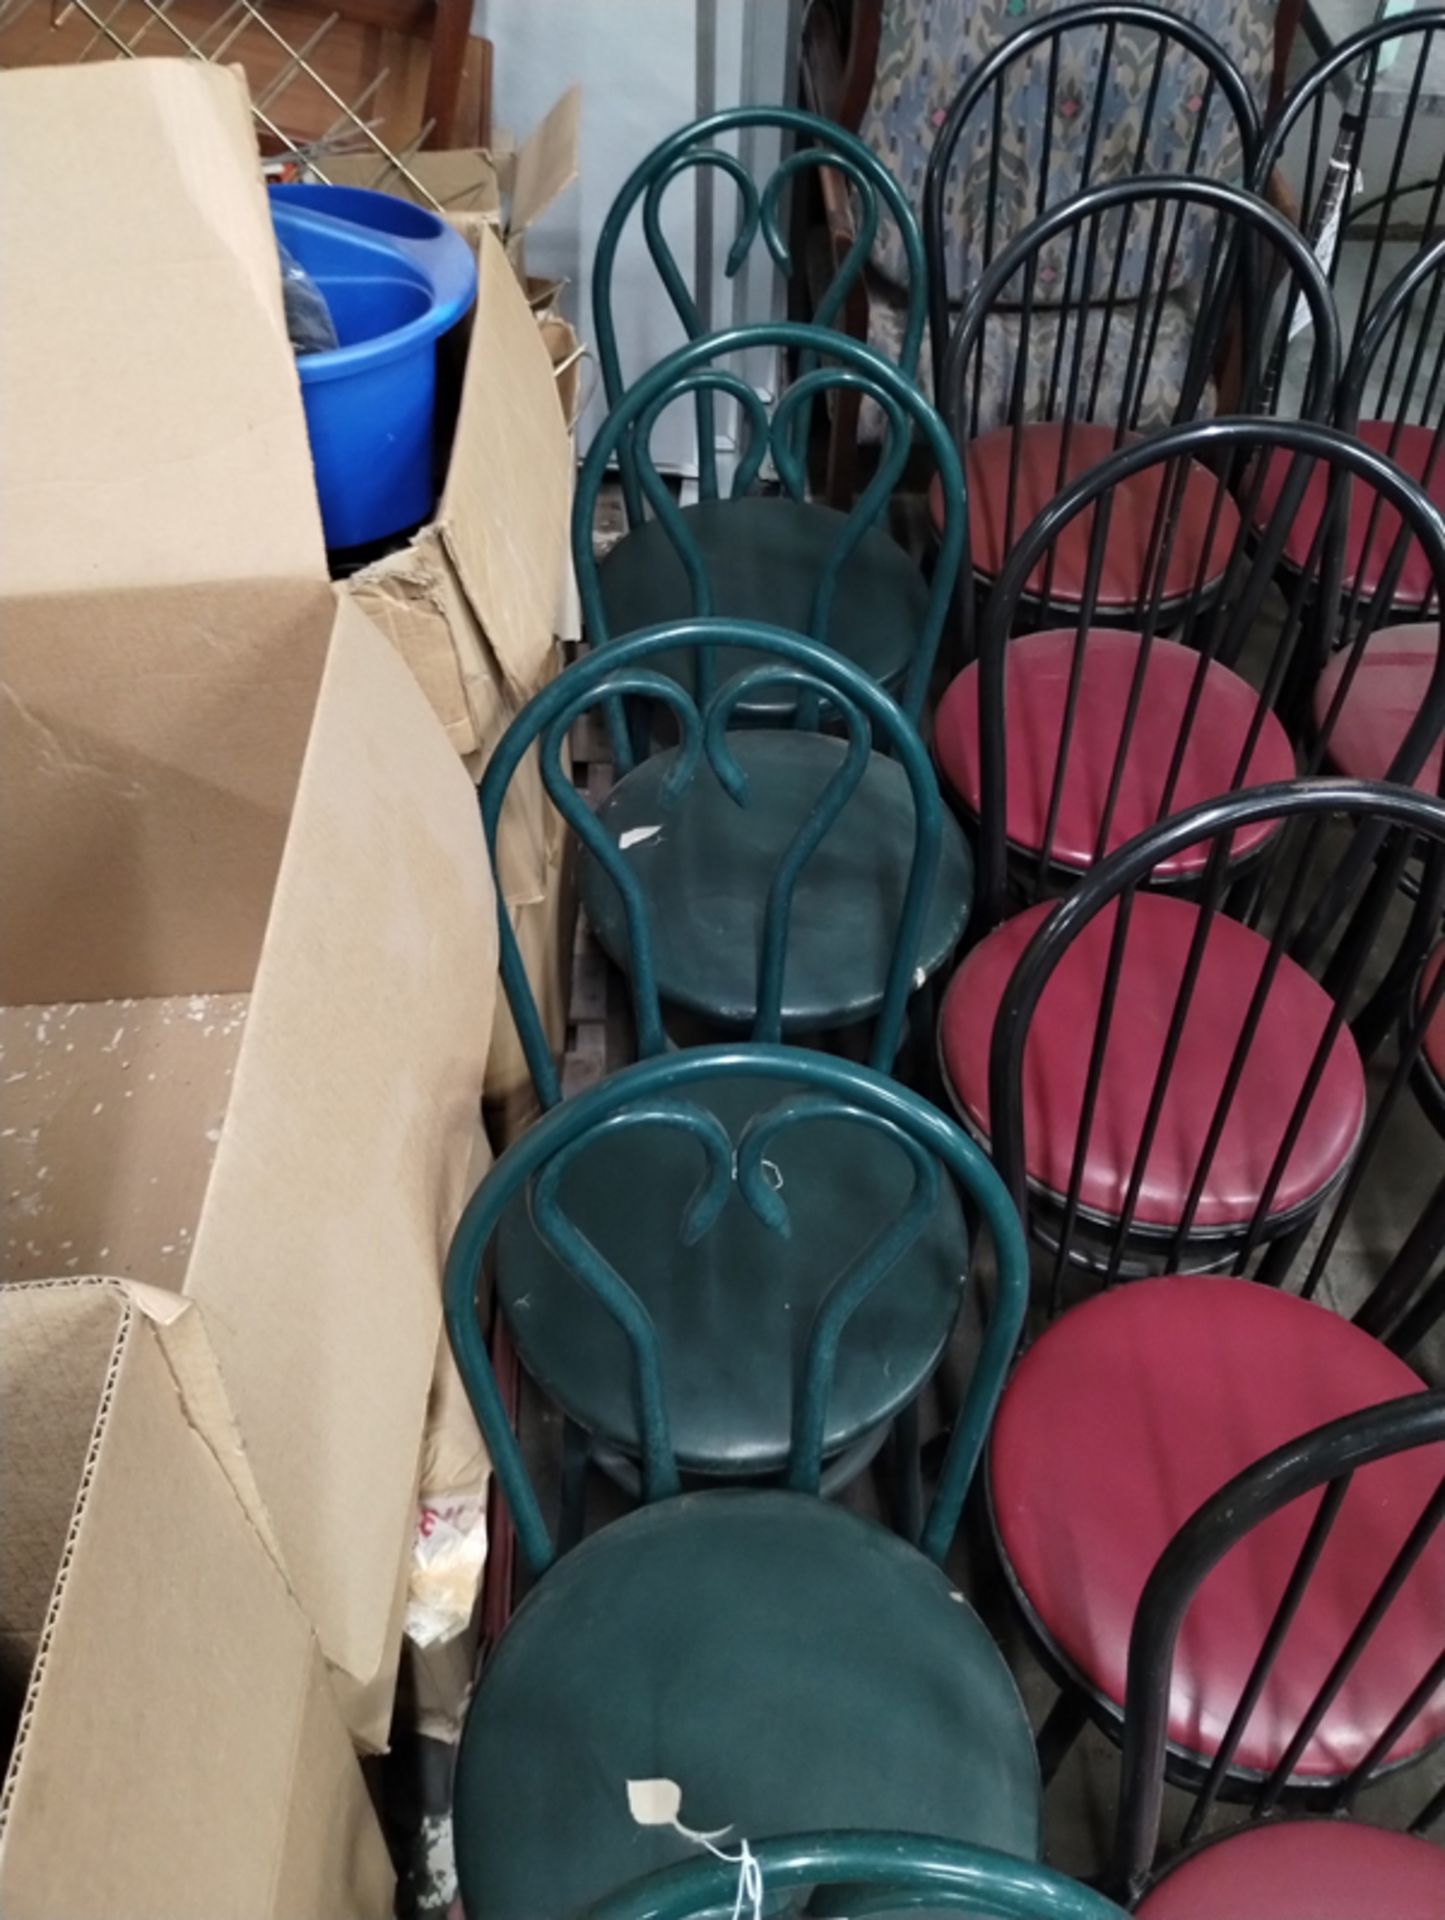 5 RESTAURANT CHAIRS - GREEN WITH METAL FRAME - Image 3 of 3